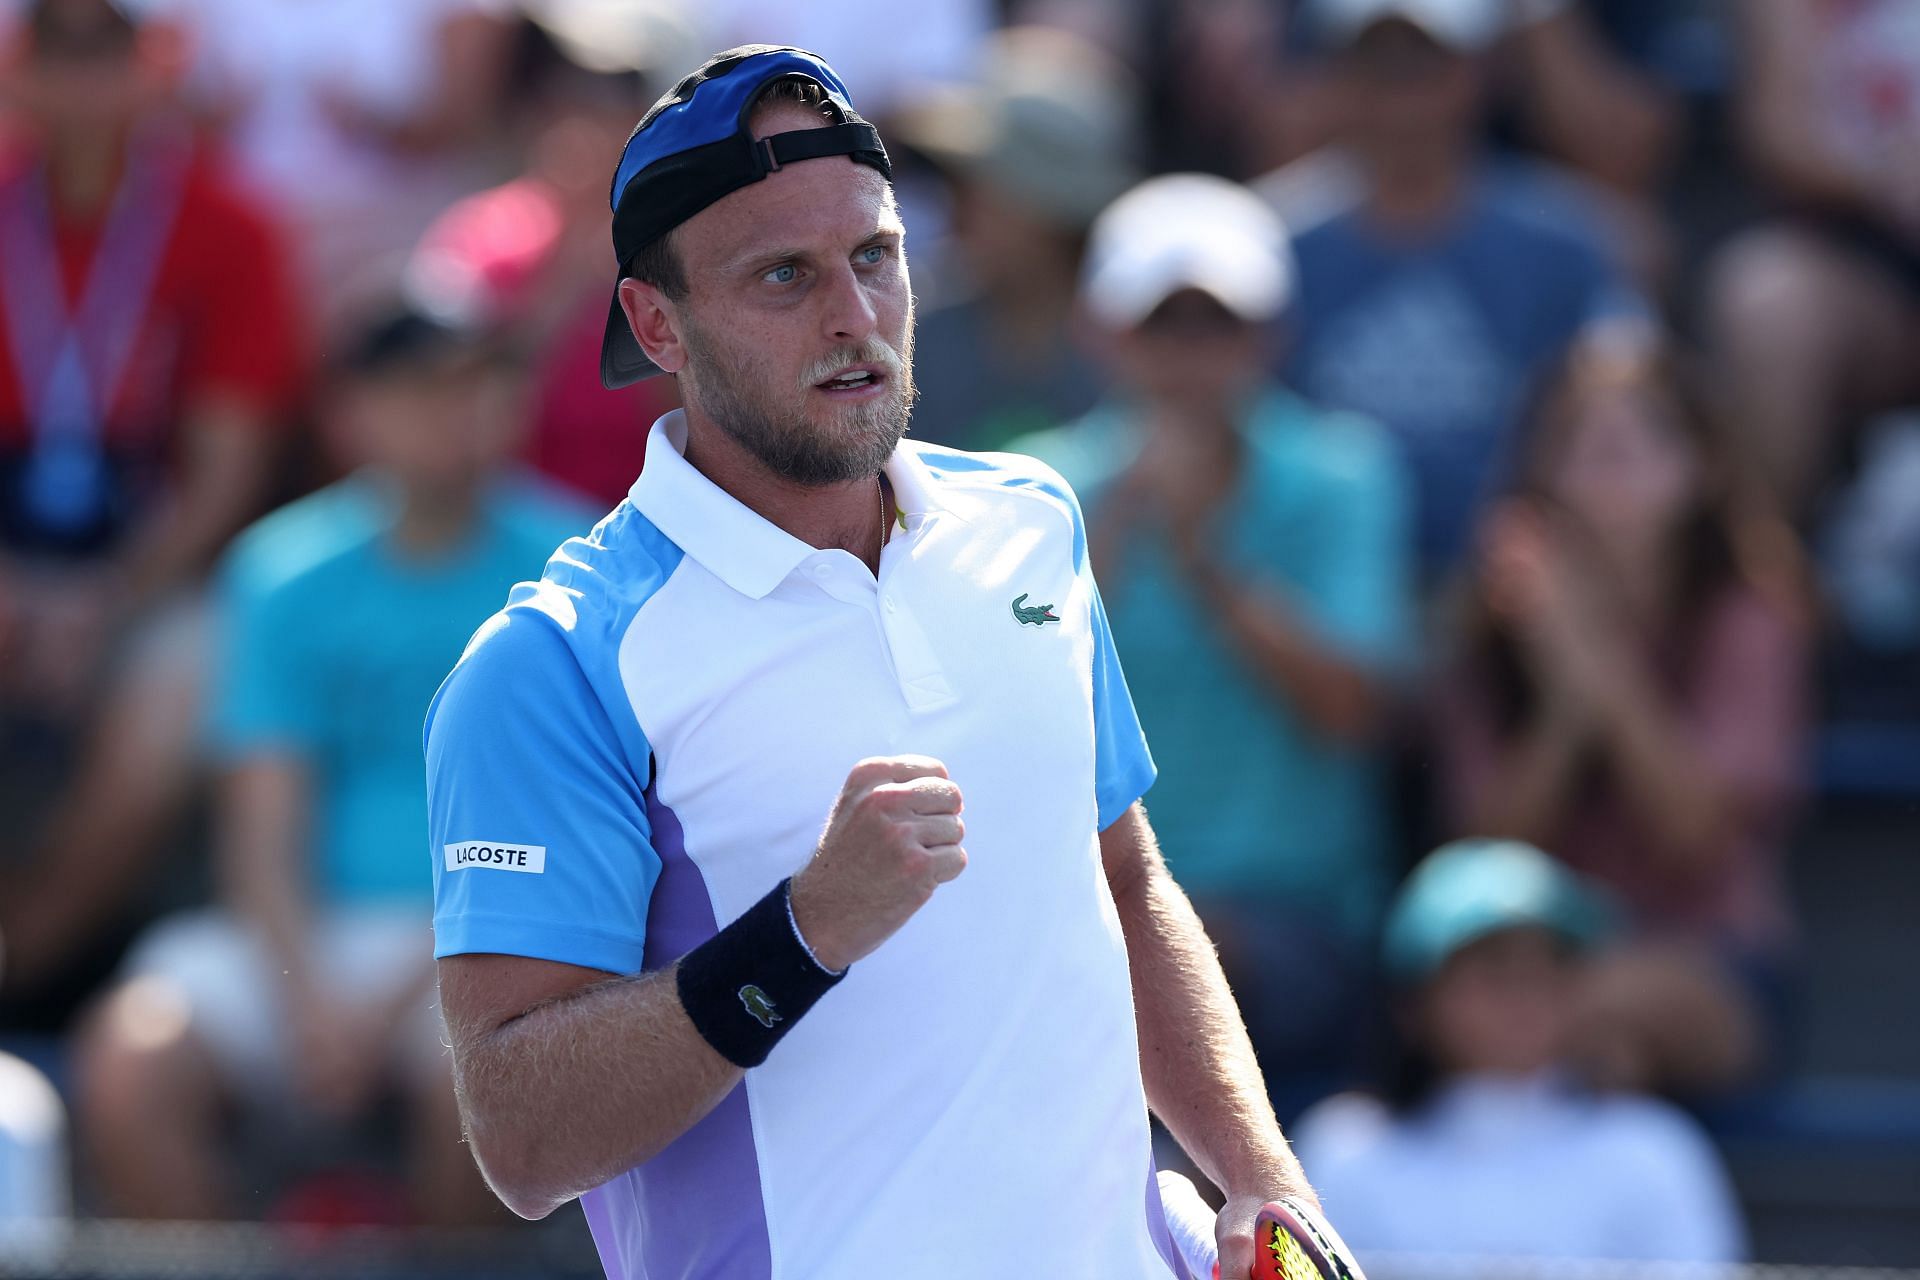 Denis Kudla takes on JJ Wolf in an all-American match-up